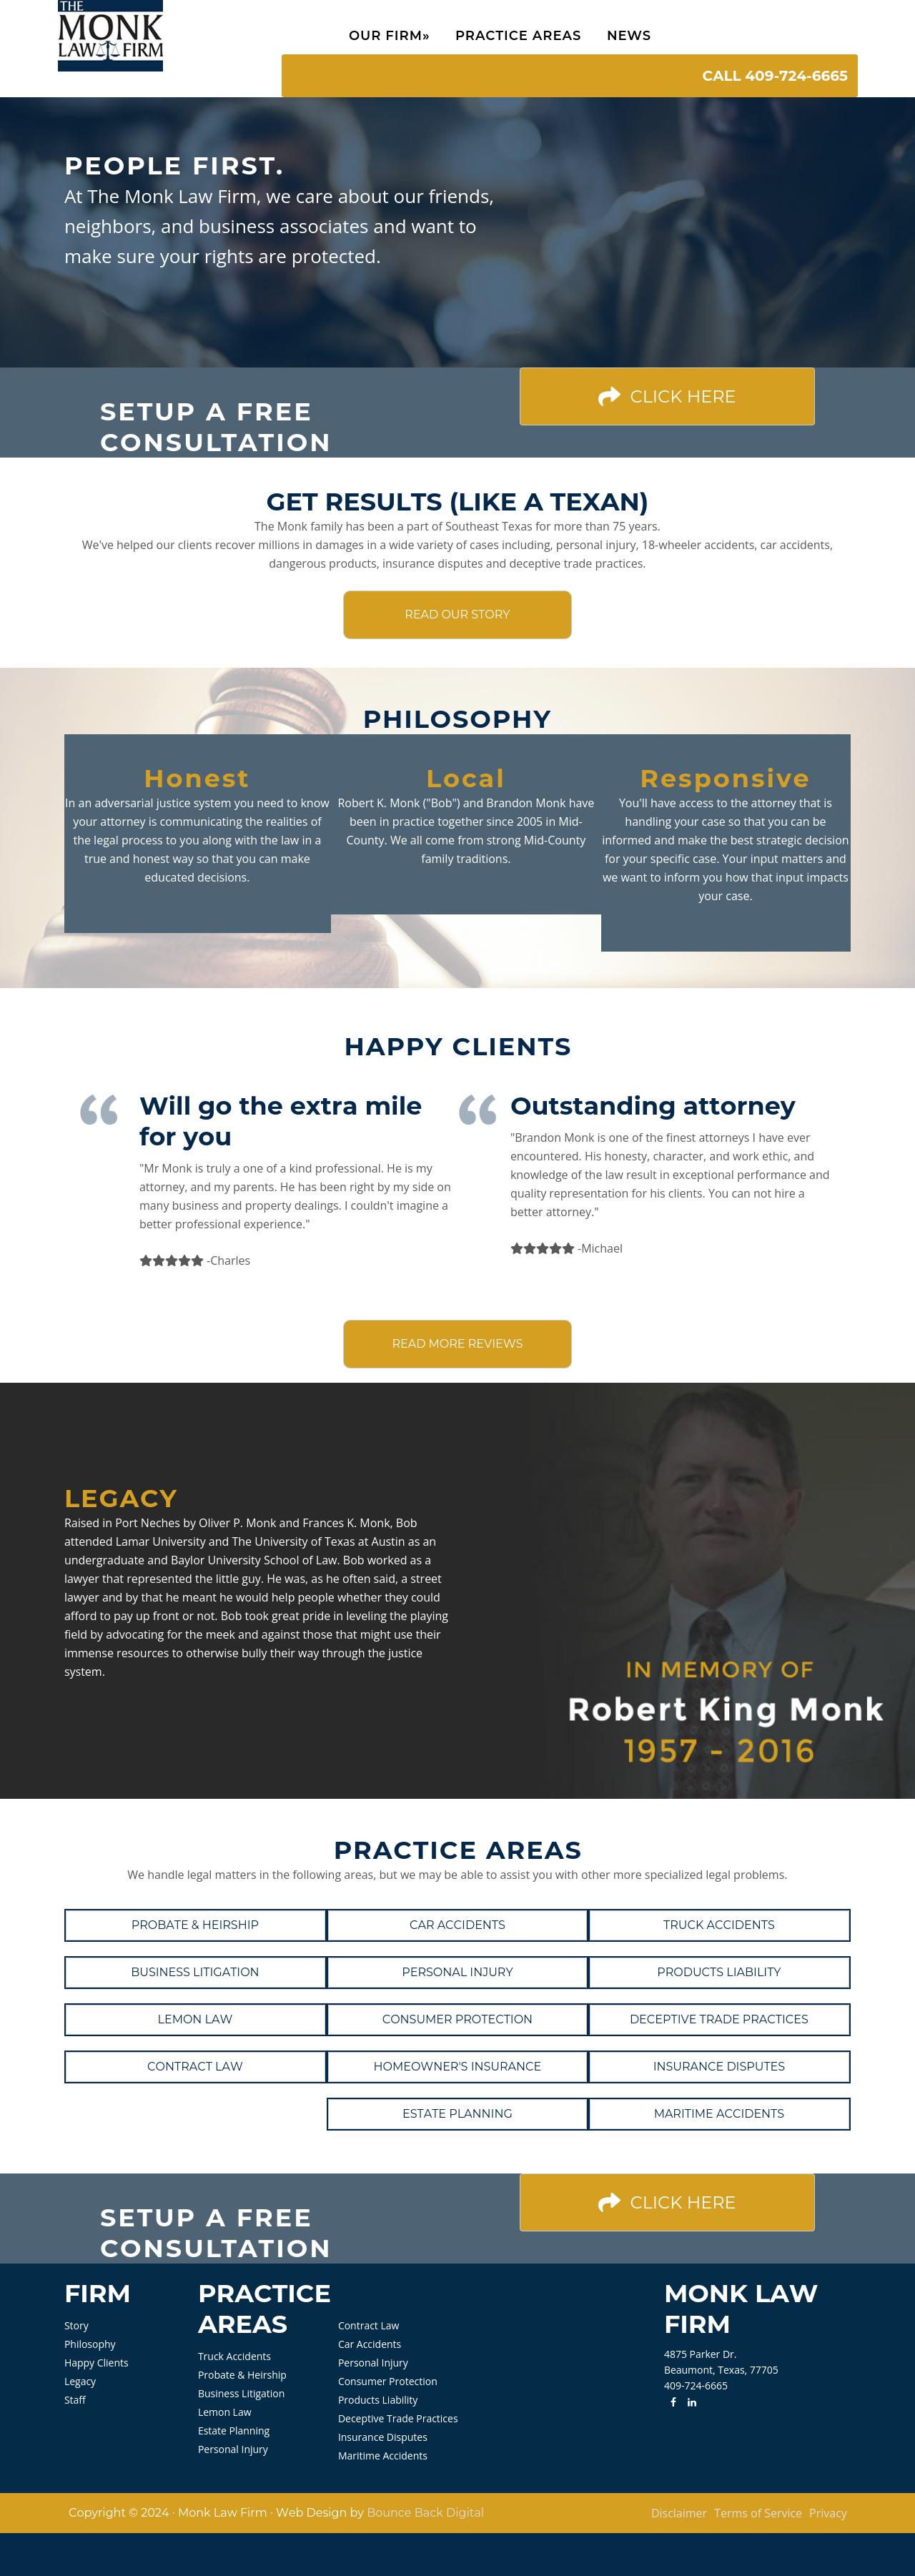 The Monk Law Firm - Port Arthur TX Lawyers